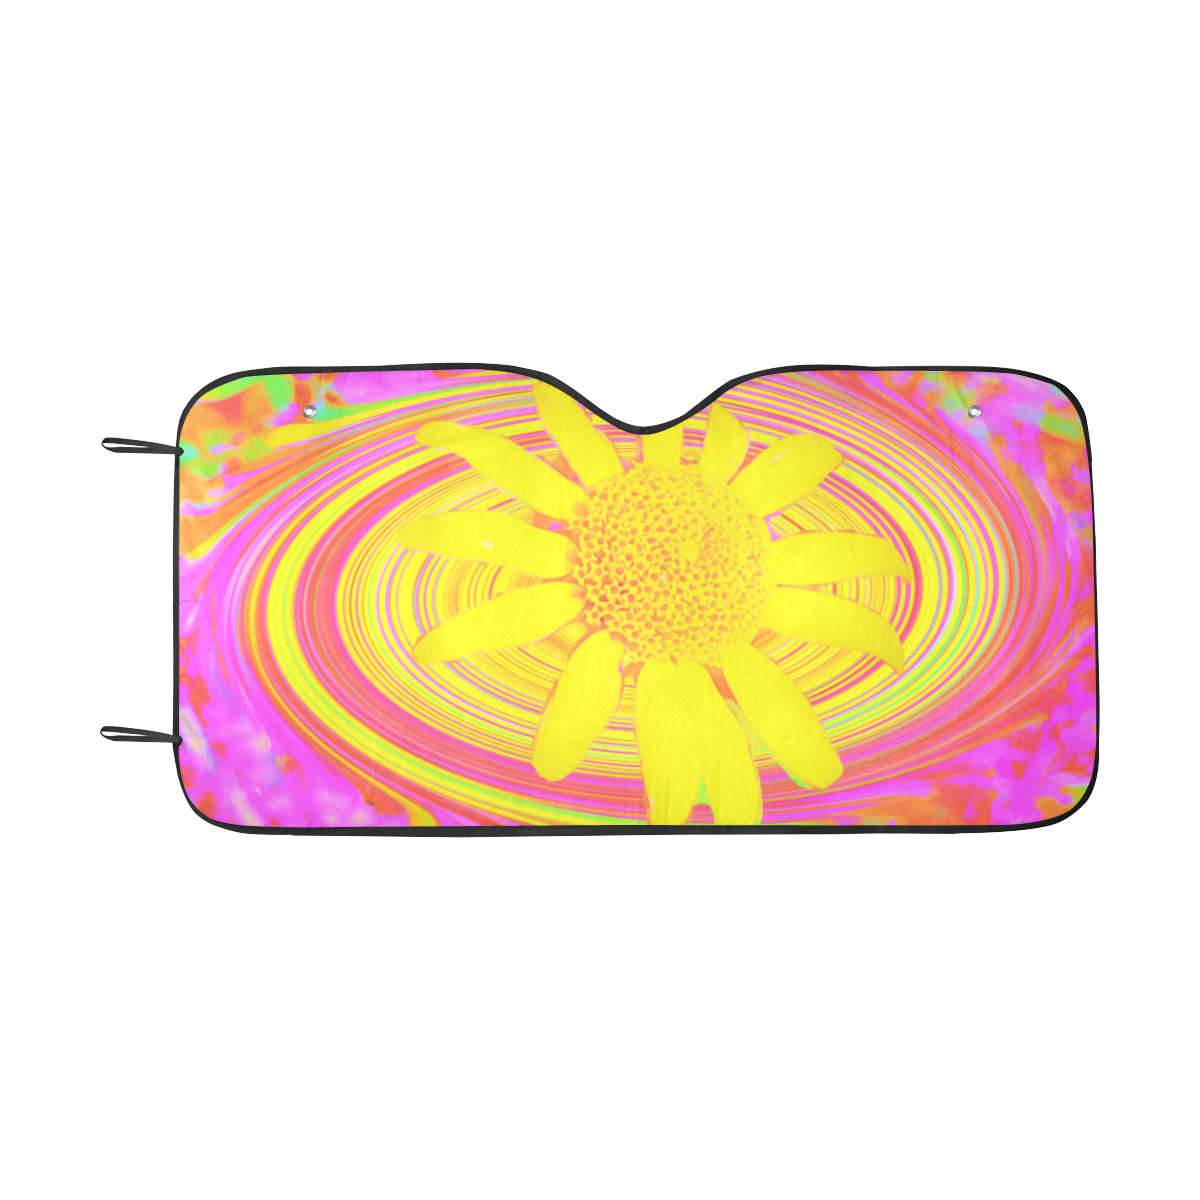 Auto Sun Shades, Yellow Sunflower on a Psychedelic Swirl